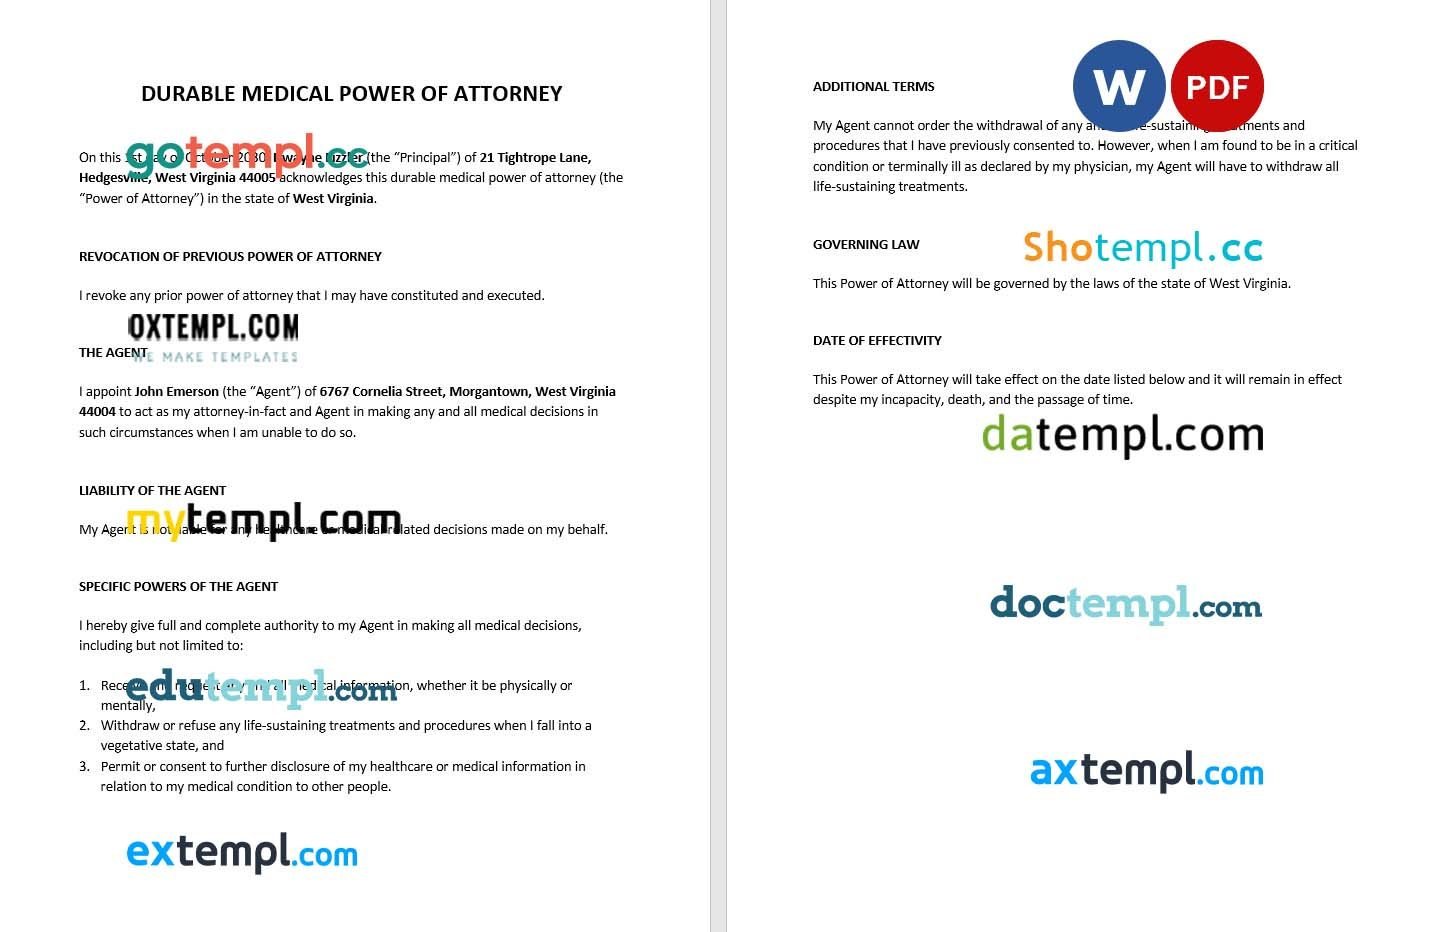 Durable Medical Power of Attorney example, fully editable